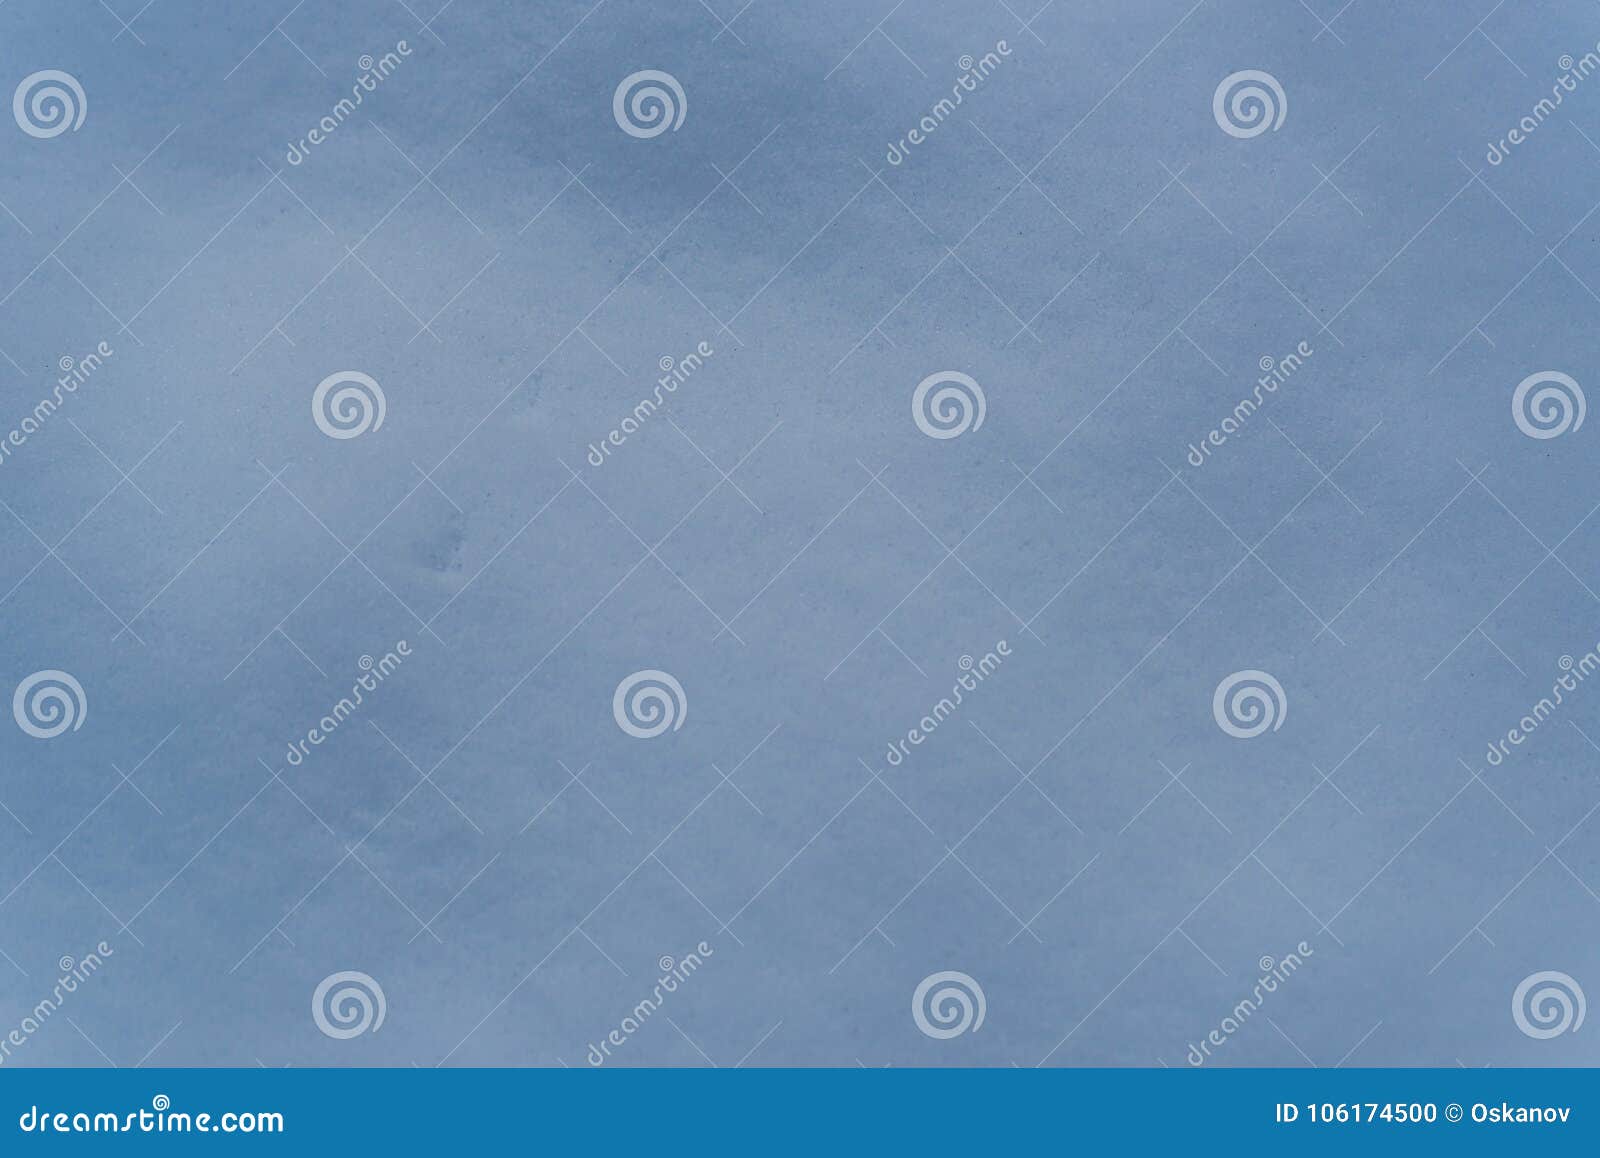 Blue Snow Texture Background Stock Photo - Image of closeup, frame ...